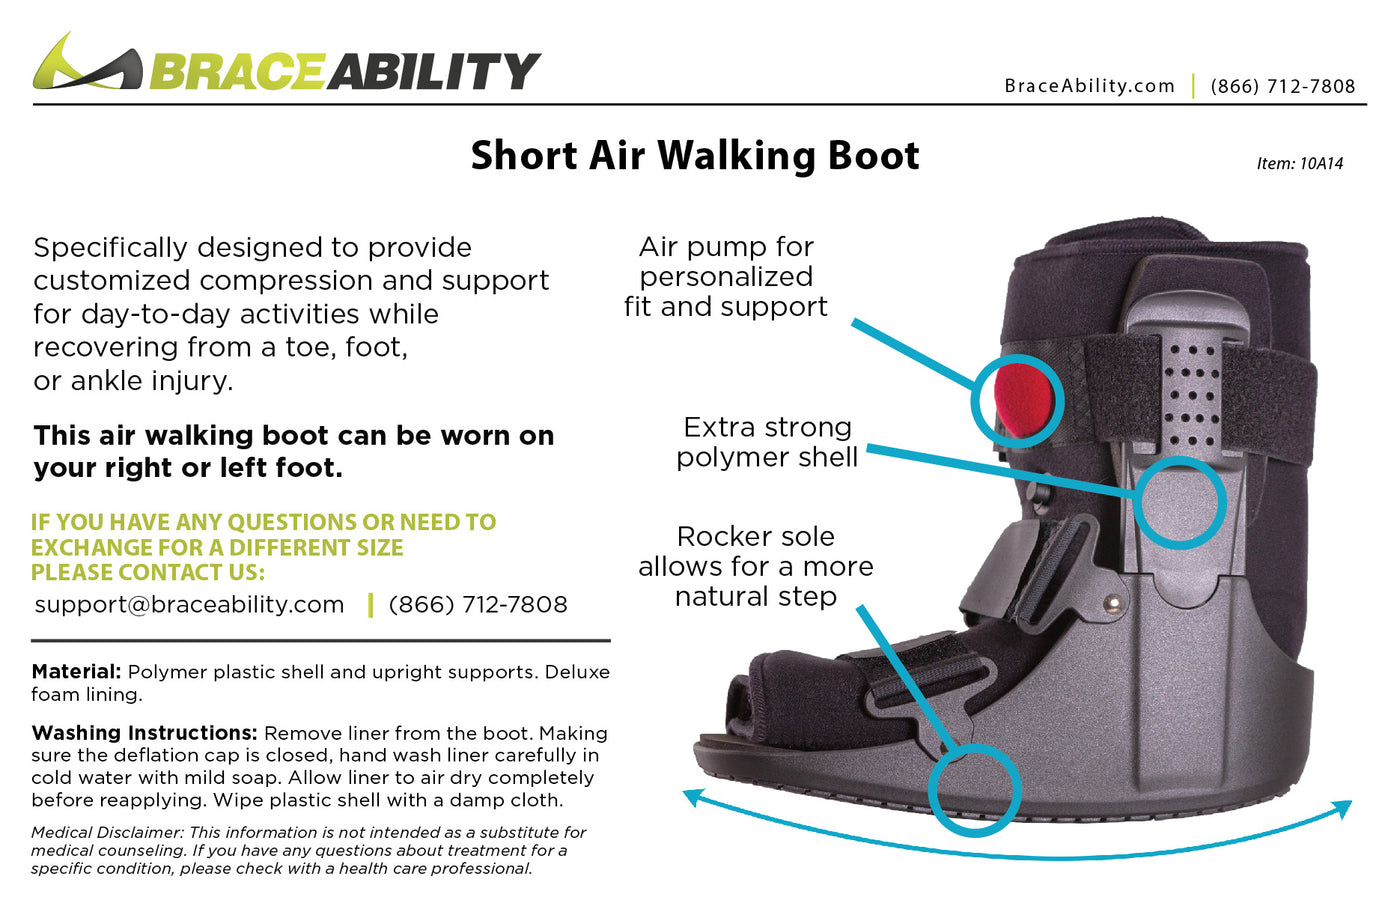 using a damp cloth, hand wash the short air walking boot and allow it to air dry before reapplying